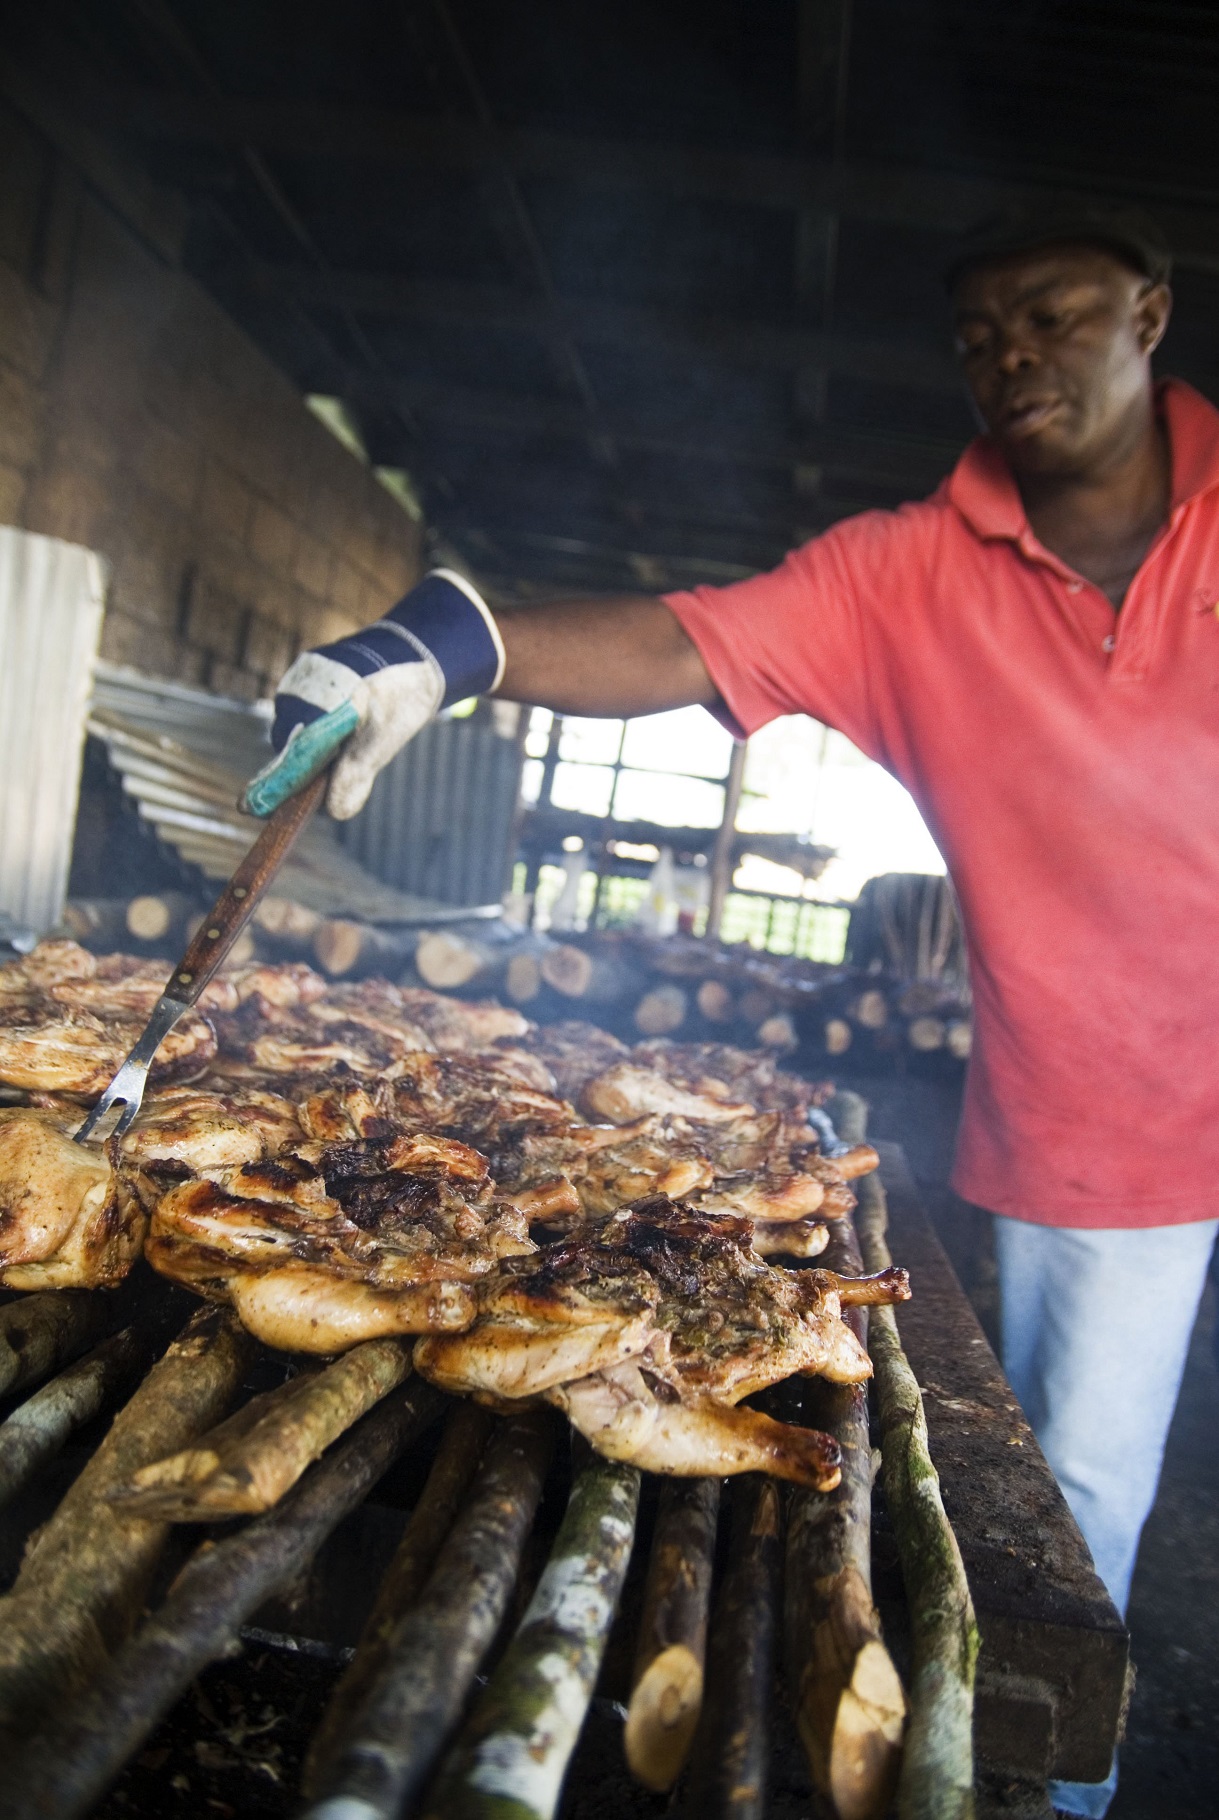 Time to place your order for jerk chicken or pork at Scotchies. Photo: Paul Marshall